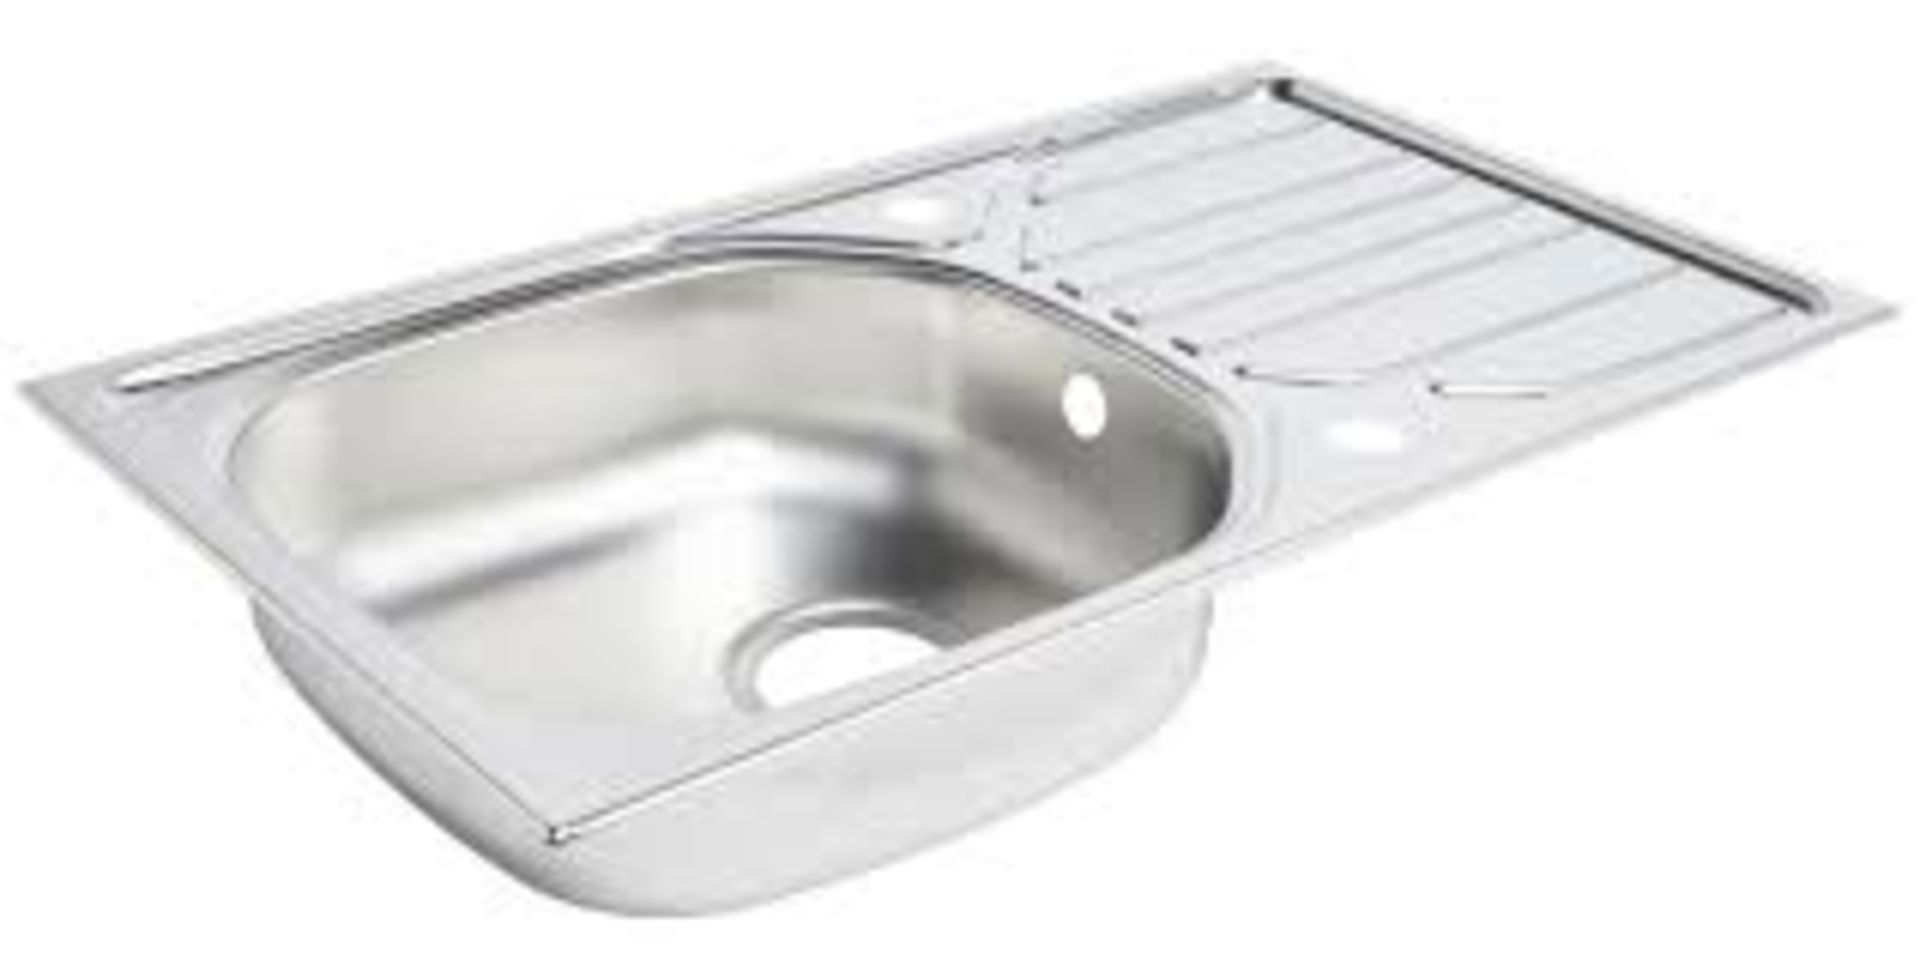 1 Bowl Stainless Steel Kitchen Sink & Drainer. - R14.5. An essential addition to any kitchen, this